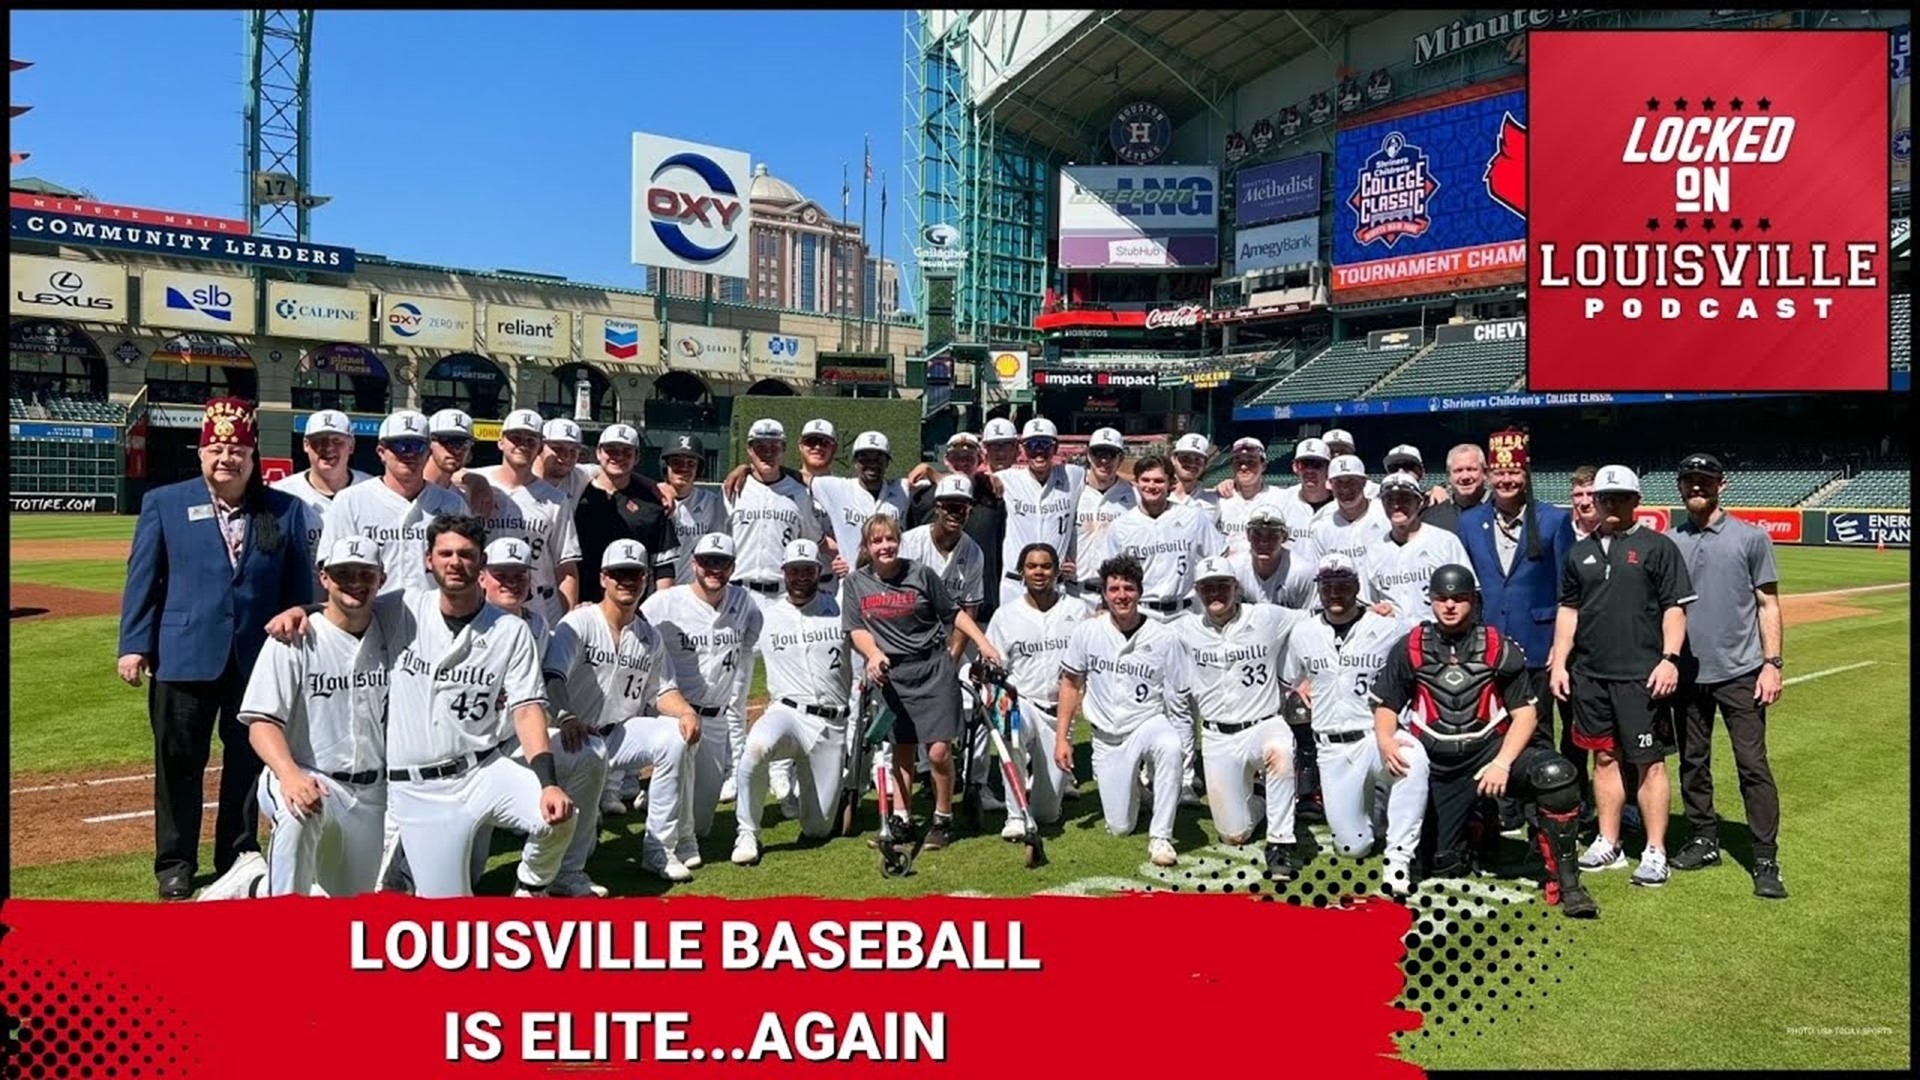 Are the Louisville Cardinals one of the top baseball teams? Statement wins over Texas A&M, TCU, UM